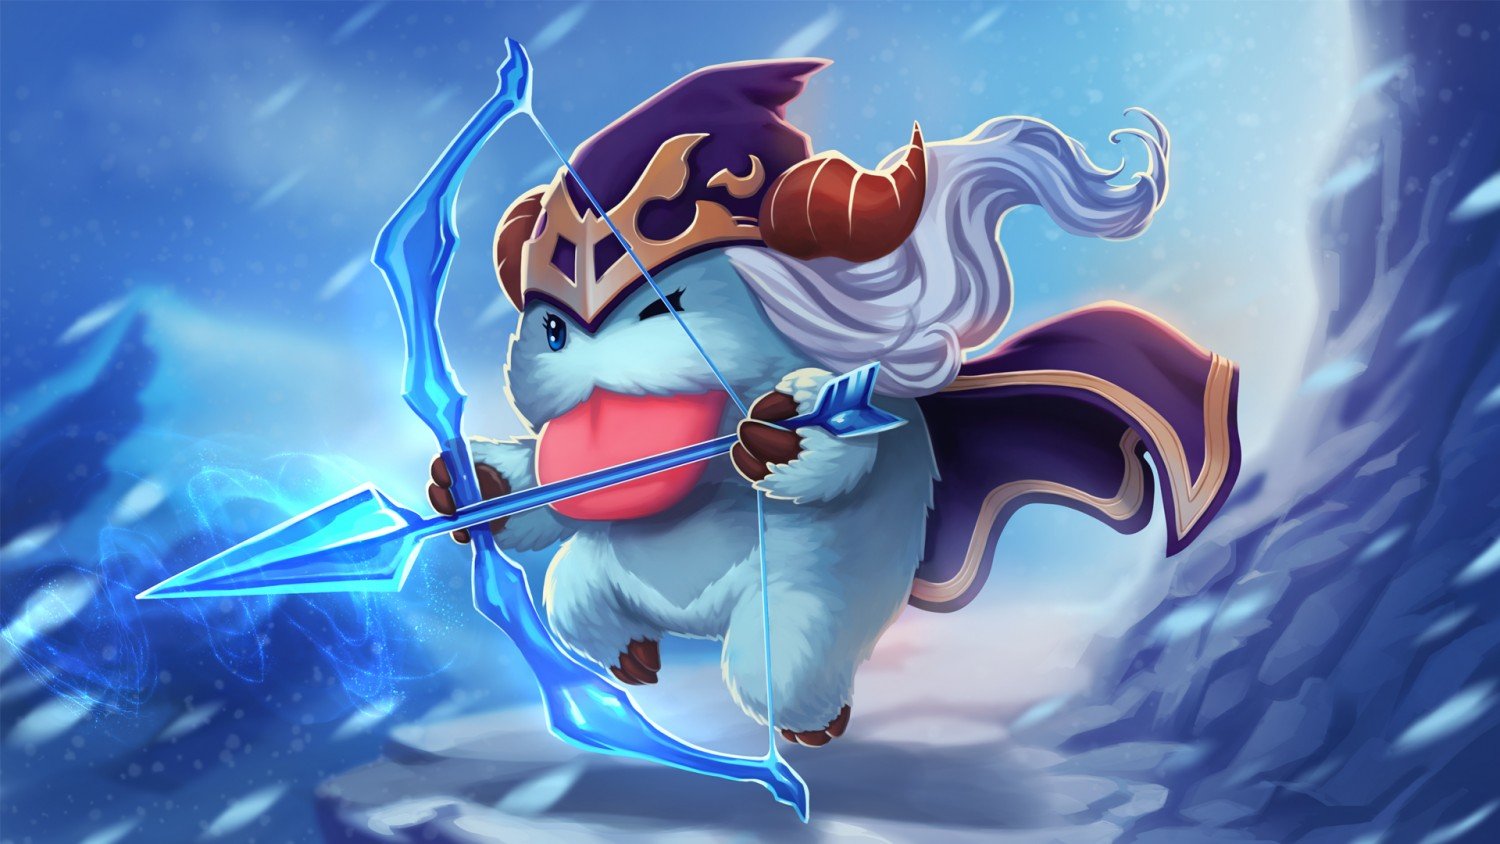 Ashe Poro - Wallpapers HD League Of Legends Wallpapers | Art-of-LoL